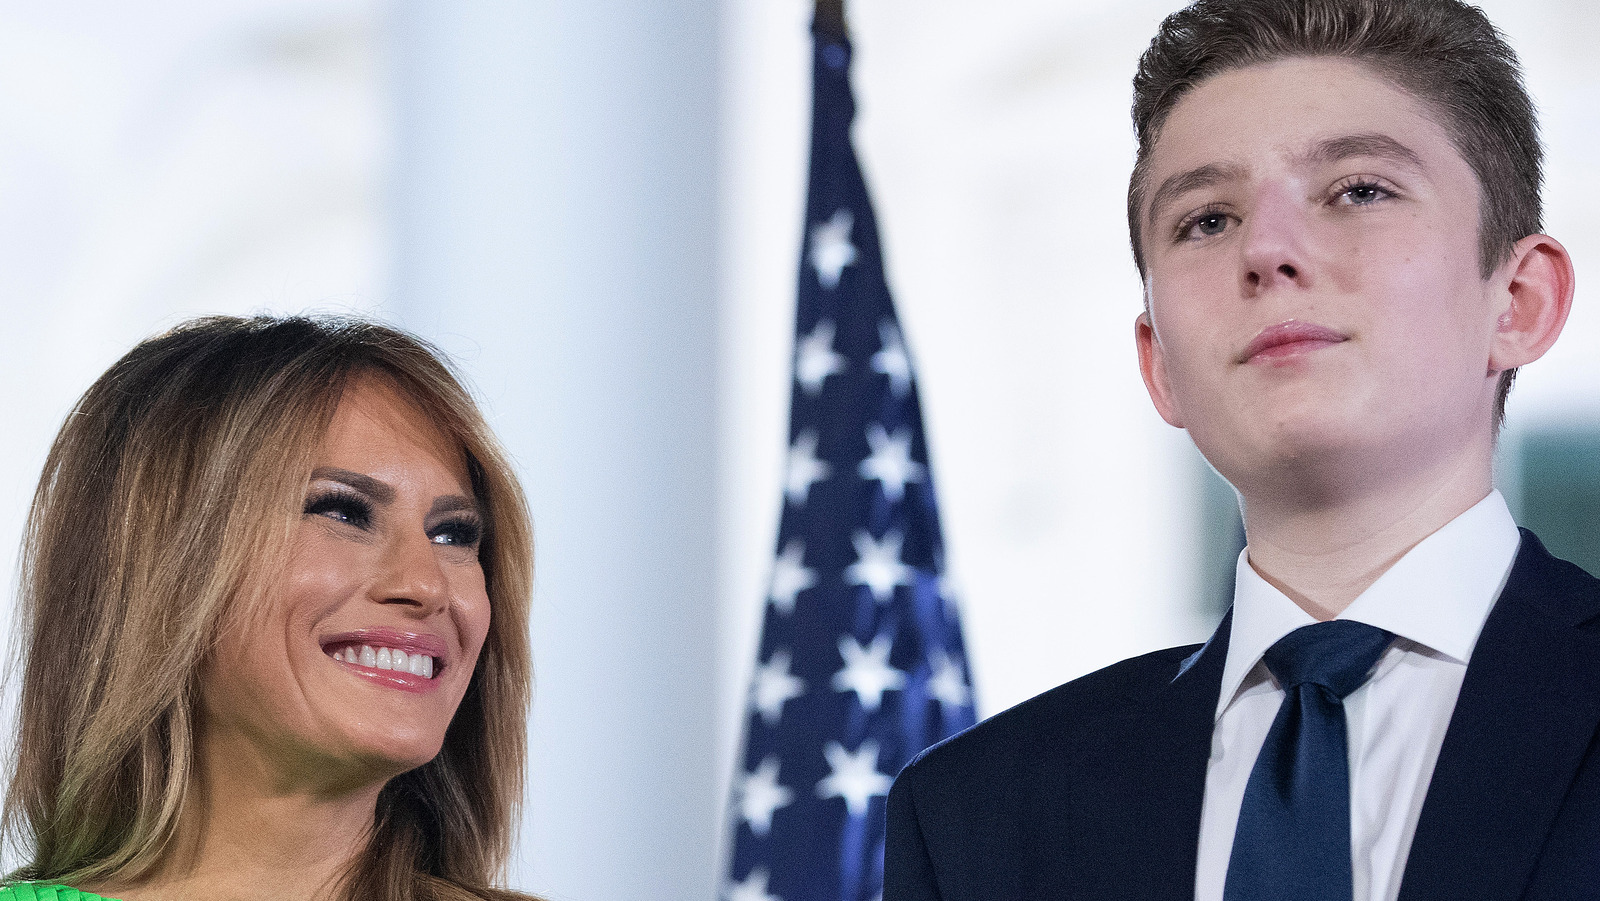 How Tall Is Barron Trump? His Height Keeps Changing